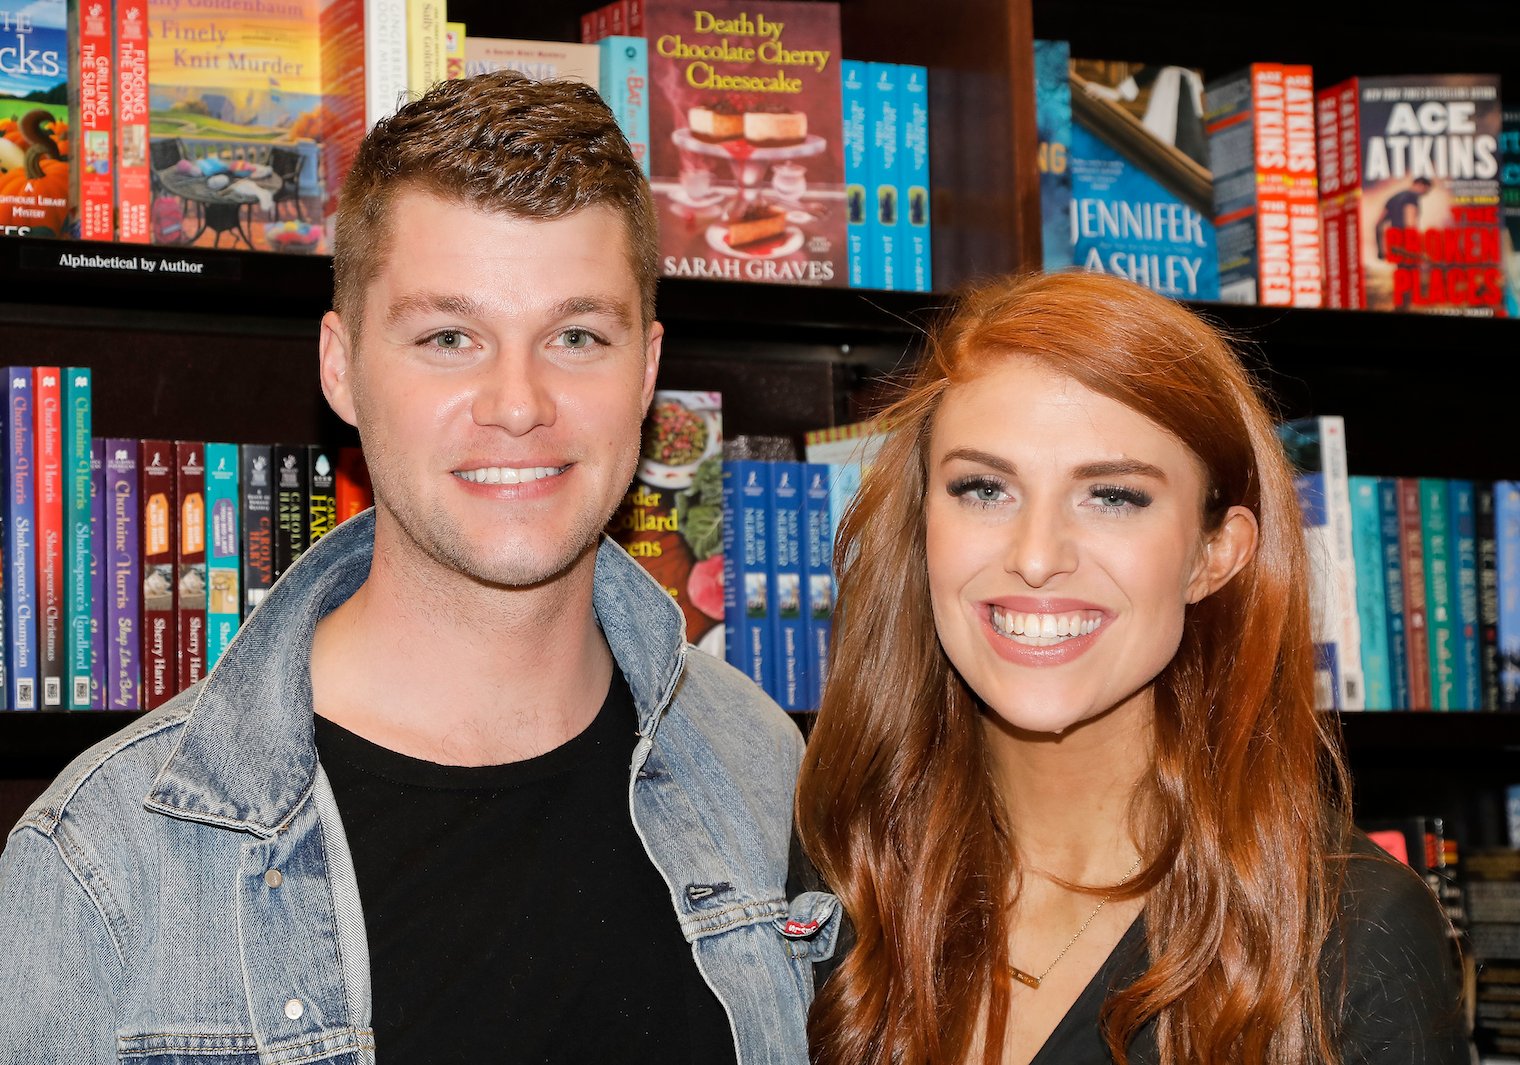 'Little People, Big World' stars Jeremy Roloff and Audrey Roloff smiling together in front of a bookshelf